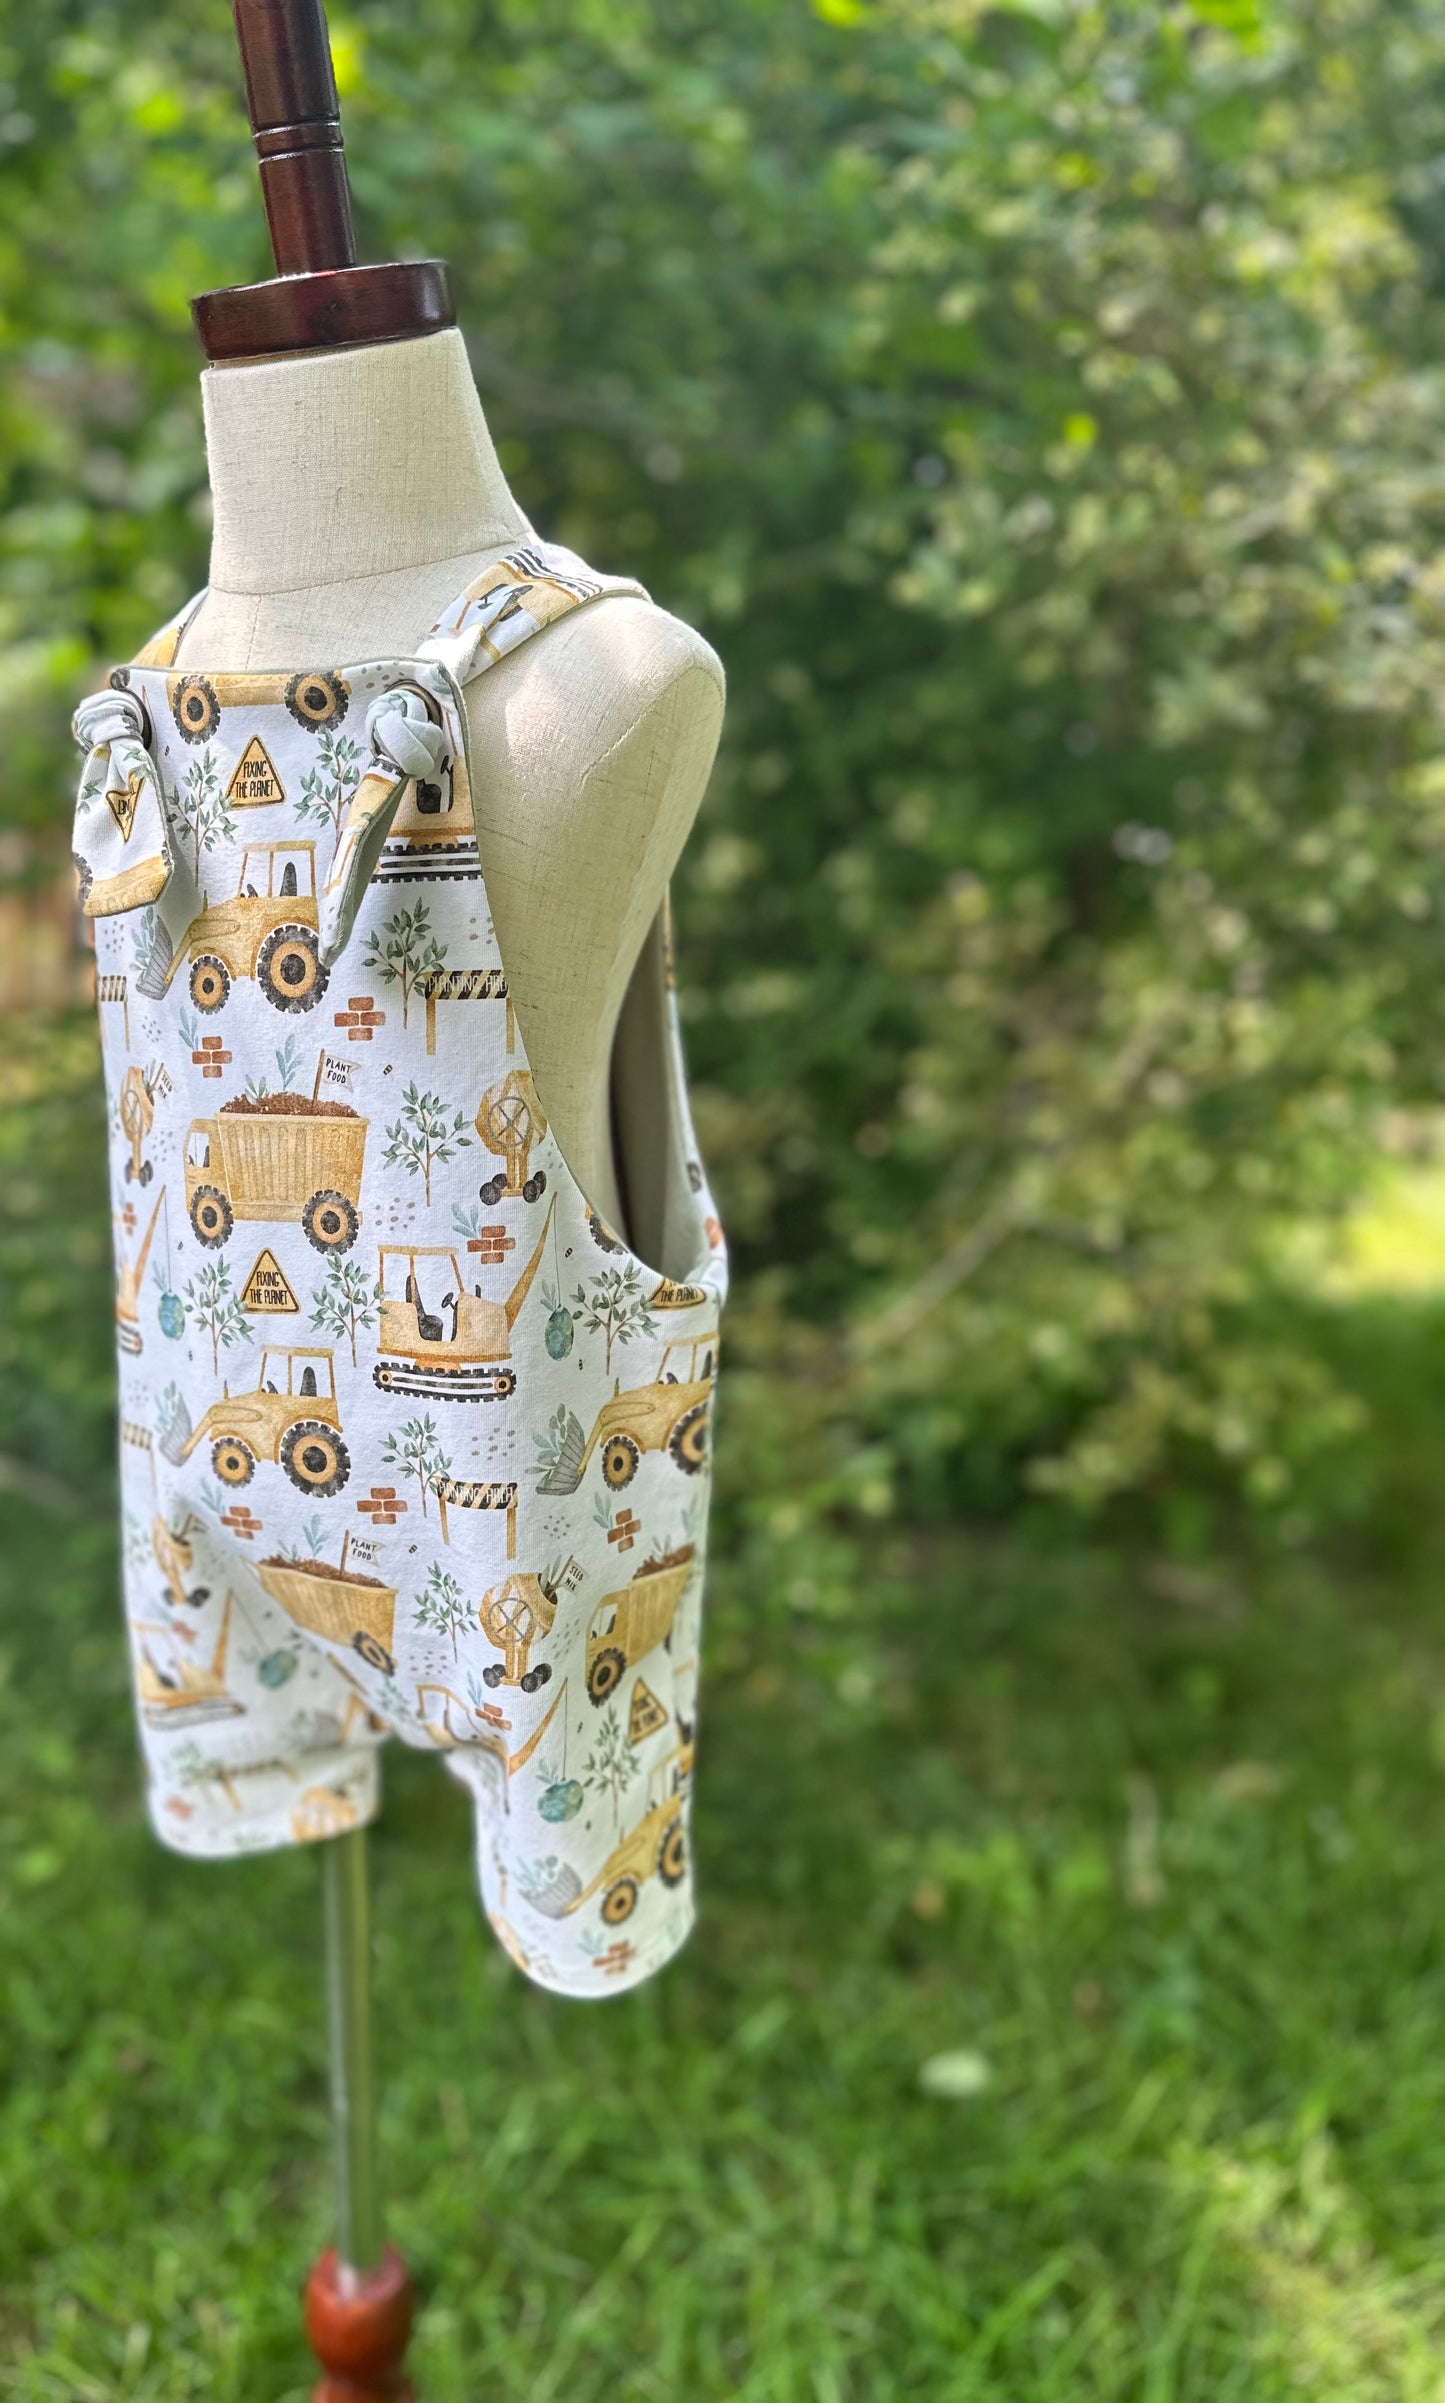 Organic "Fixing the Planet" Overalls